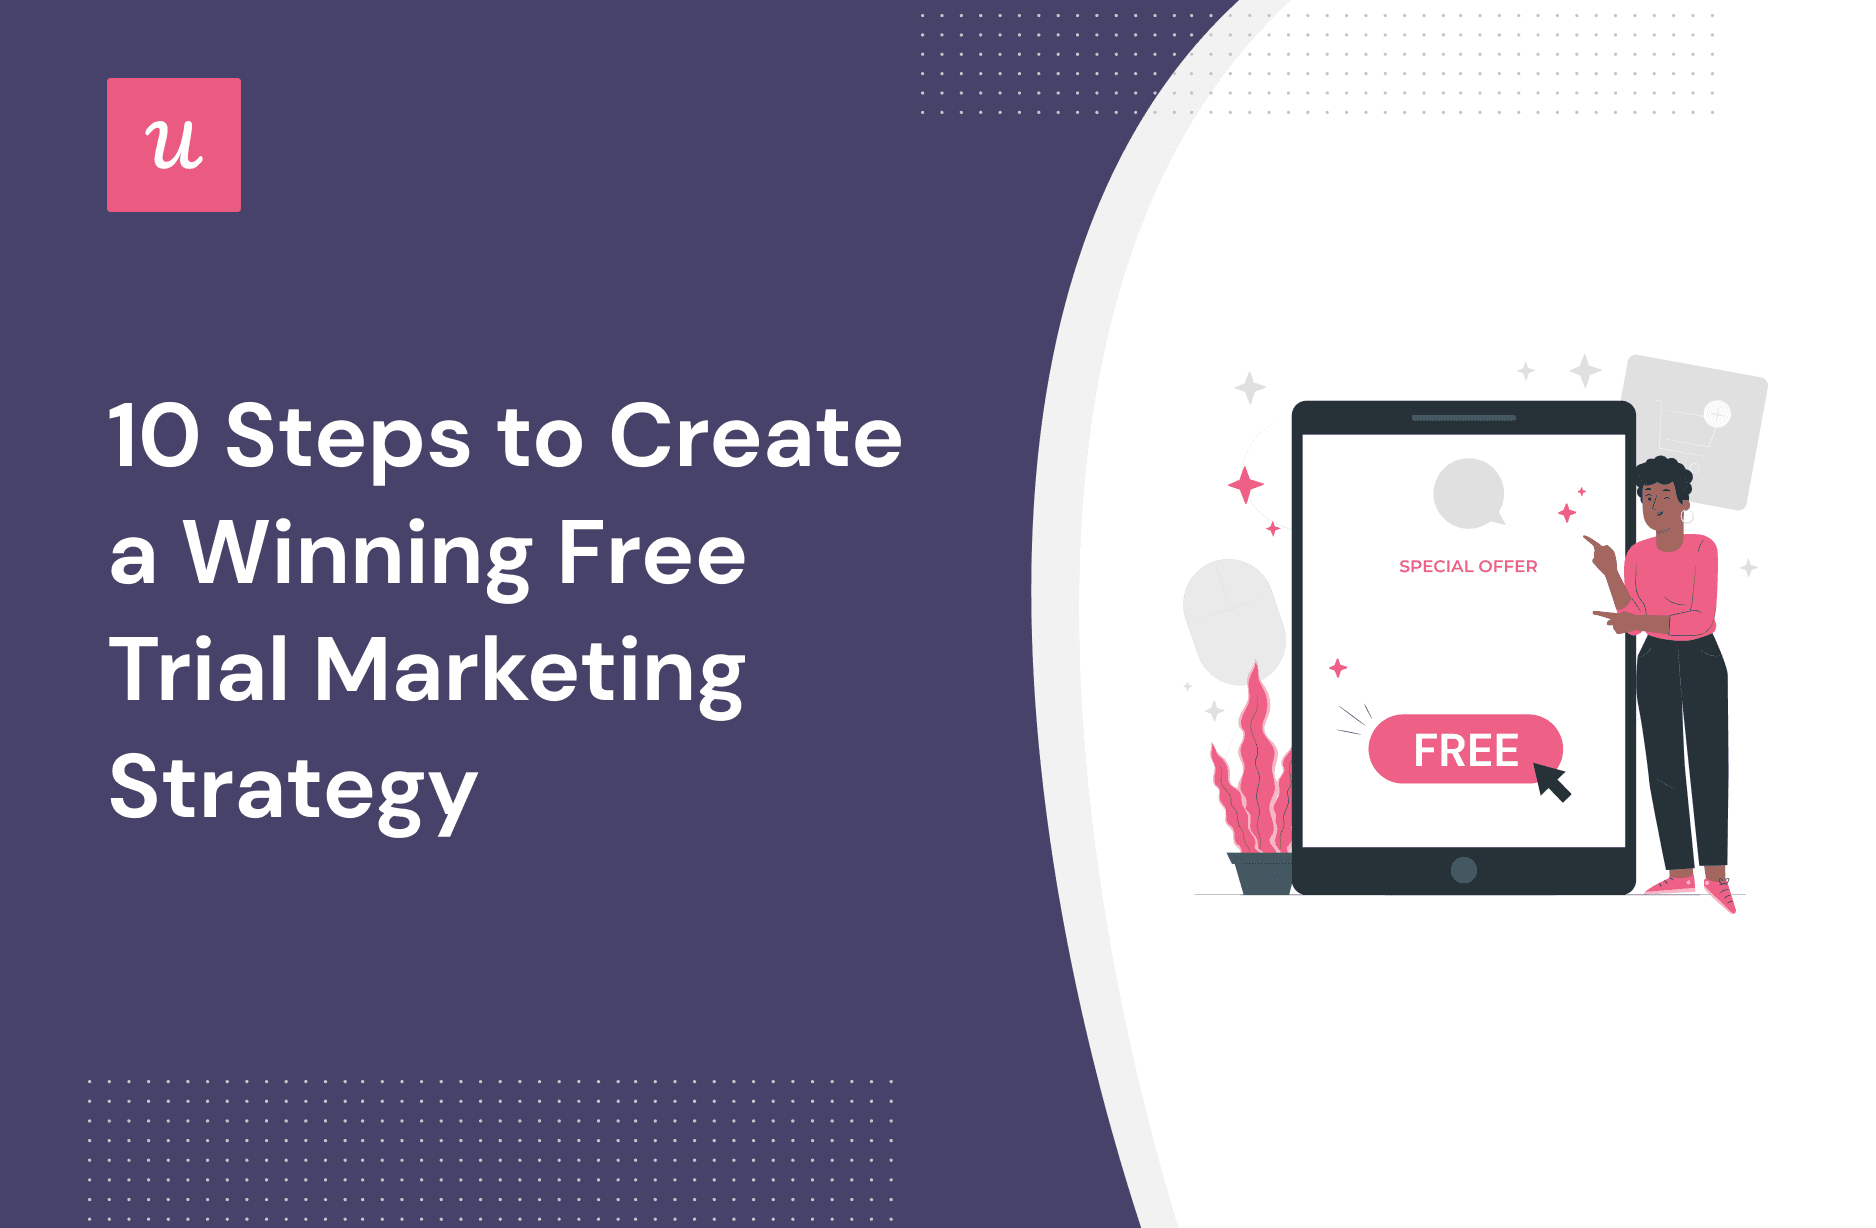 10 Steps to Create a Winning Free Trial Marketing Strategy cover